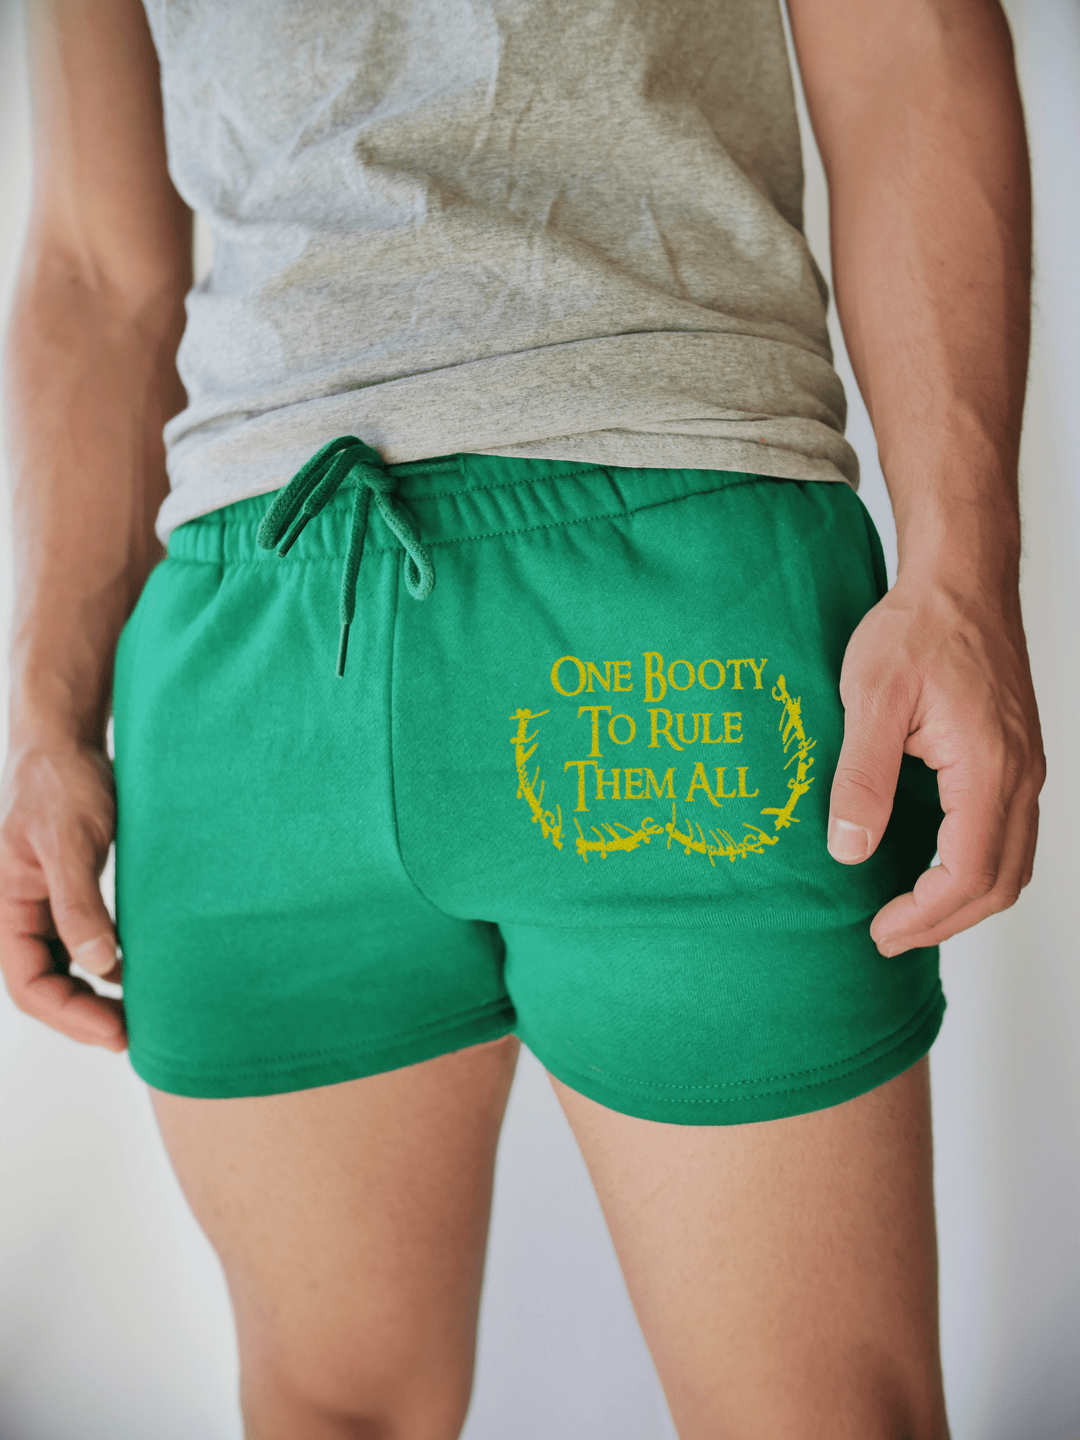 PixelThat Punderwear Shorts Kelly Green / S / Front One Booty To Rule Them All Men's Gym Shorts